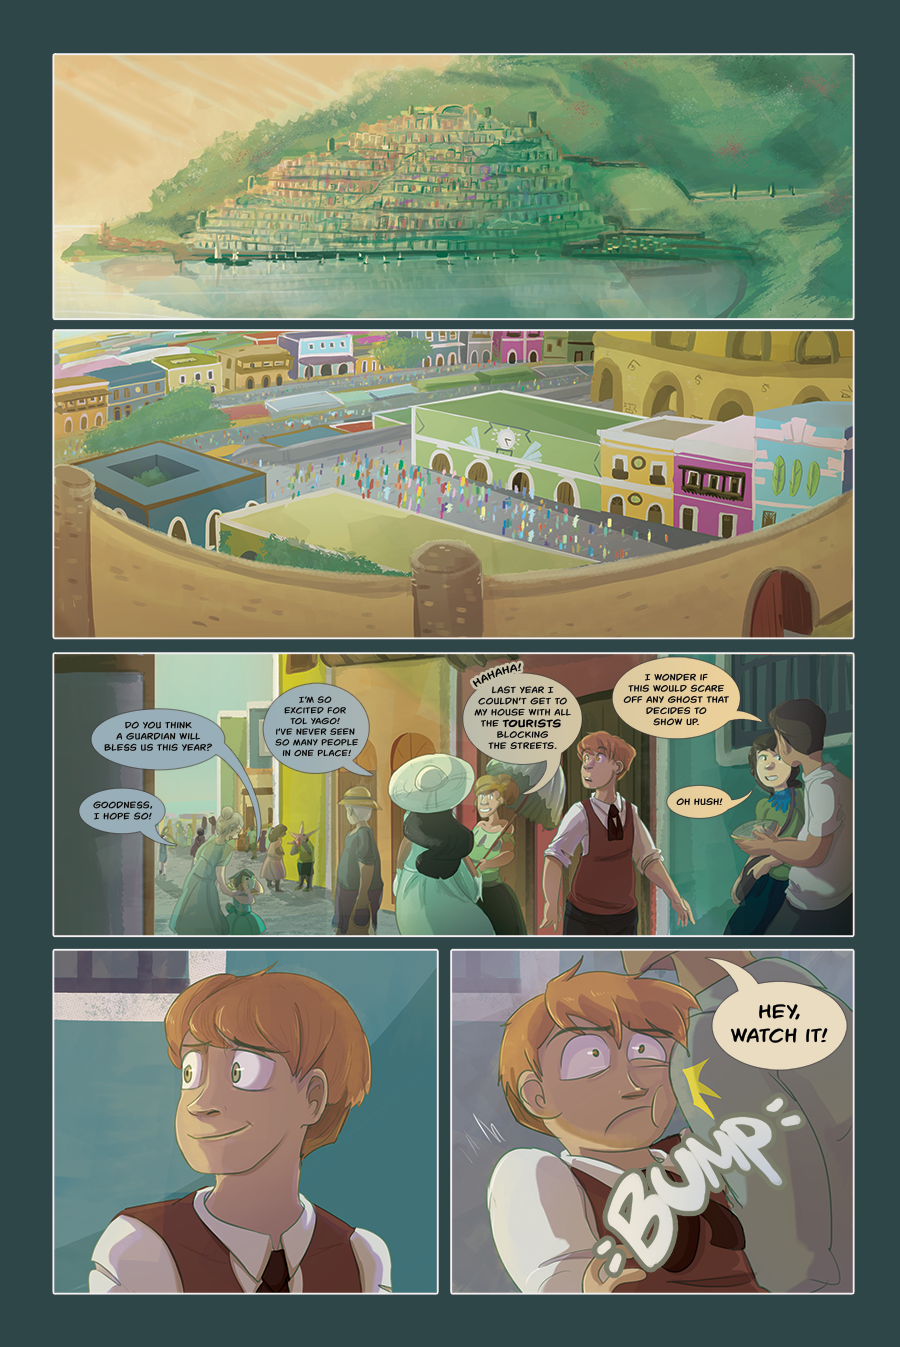 Chapter 5, prologue page 1